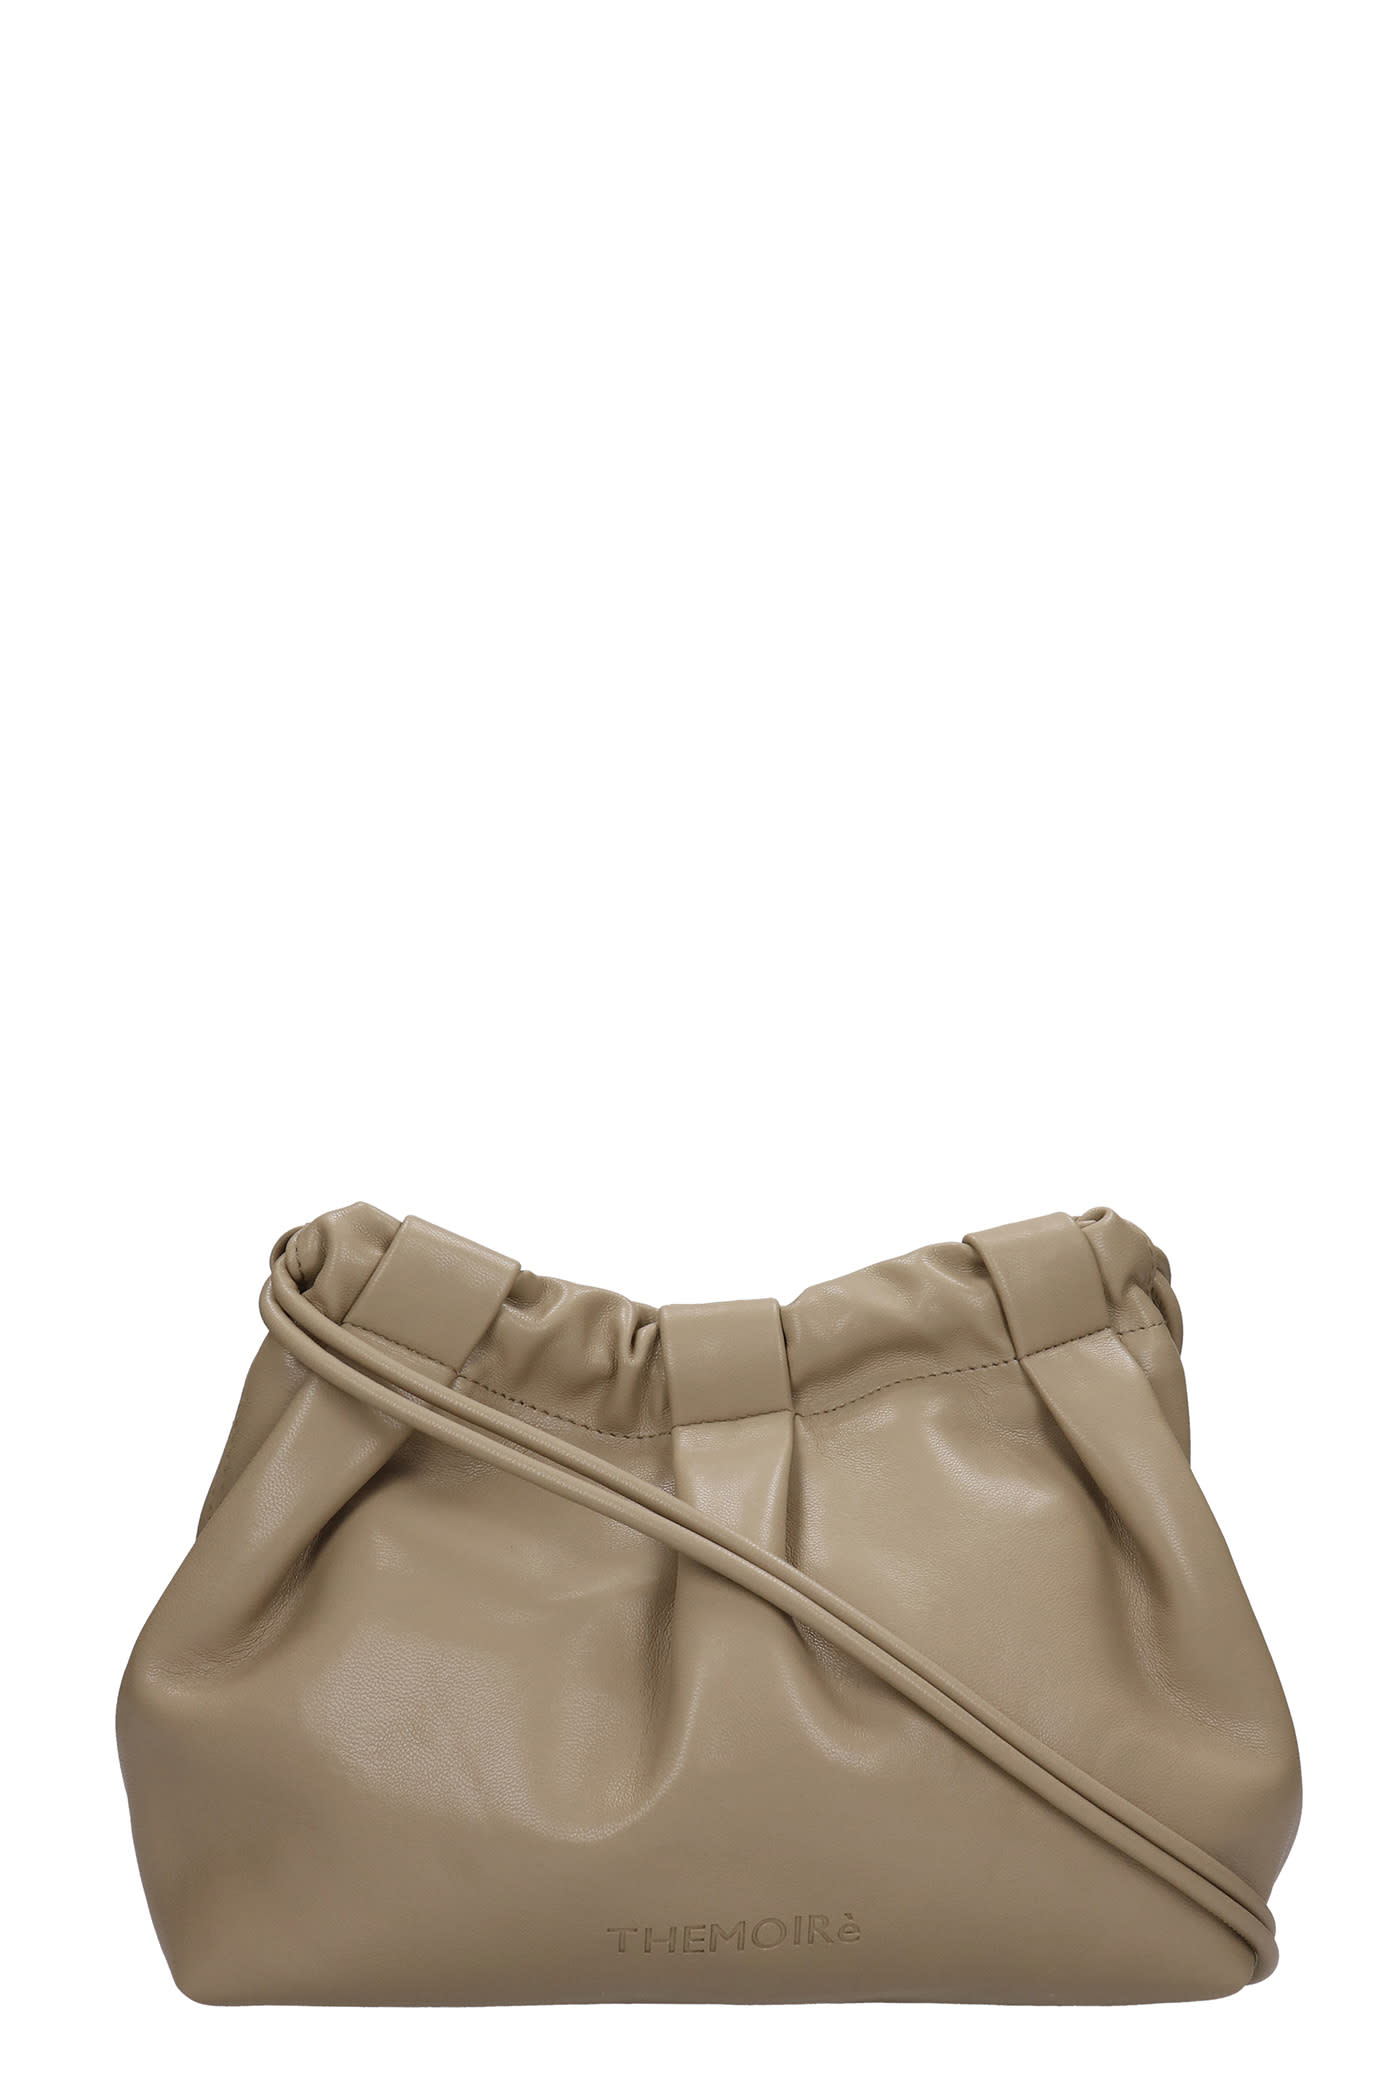 THEMOIRè Thetis Basic Shoulder Bag In Taupe Faux Leather